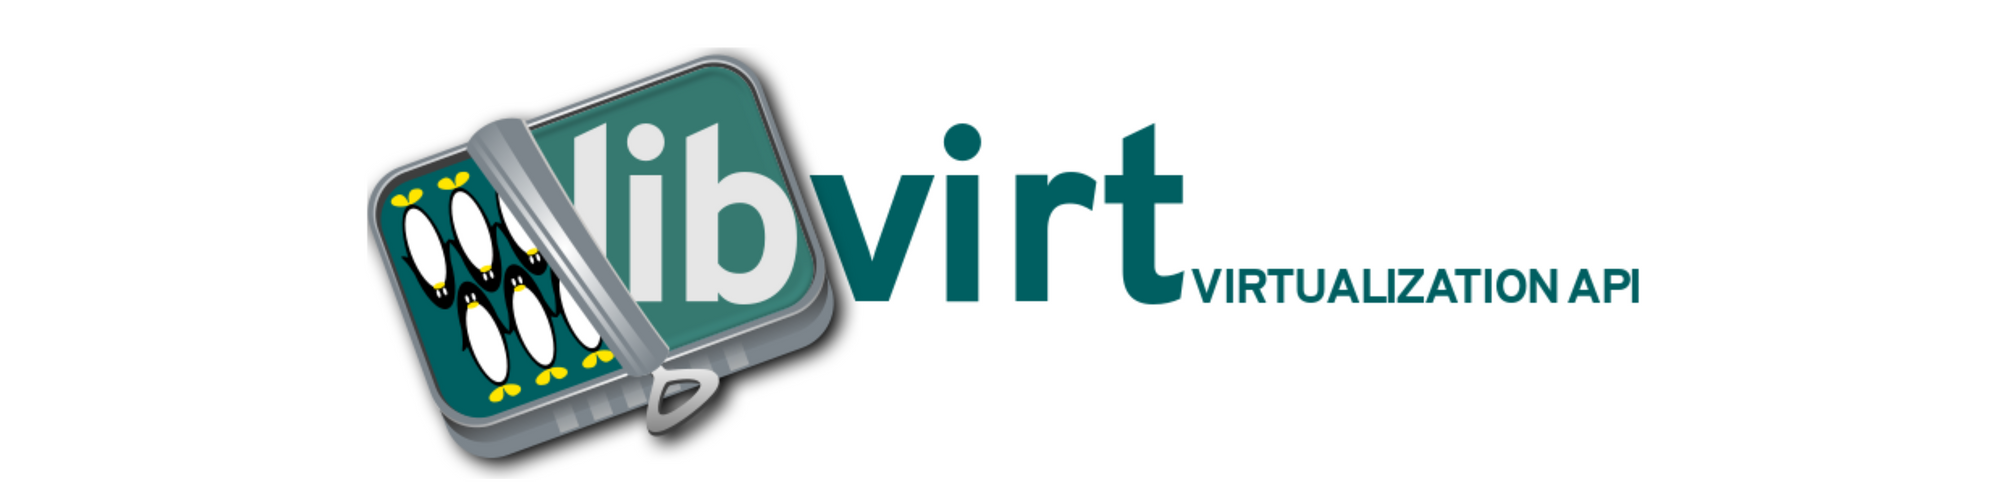 Addressing a 'Paused' or 'Frozen' Libvirt Virtual Machine